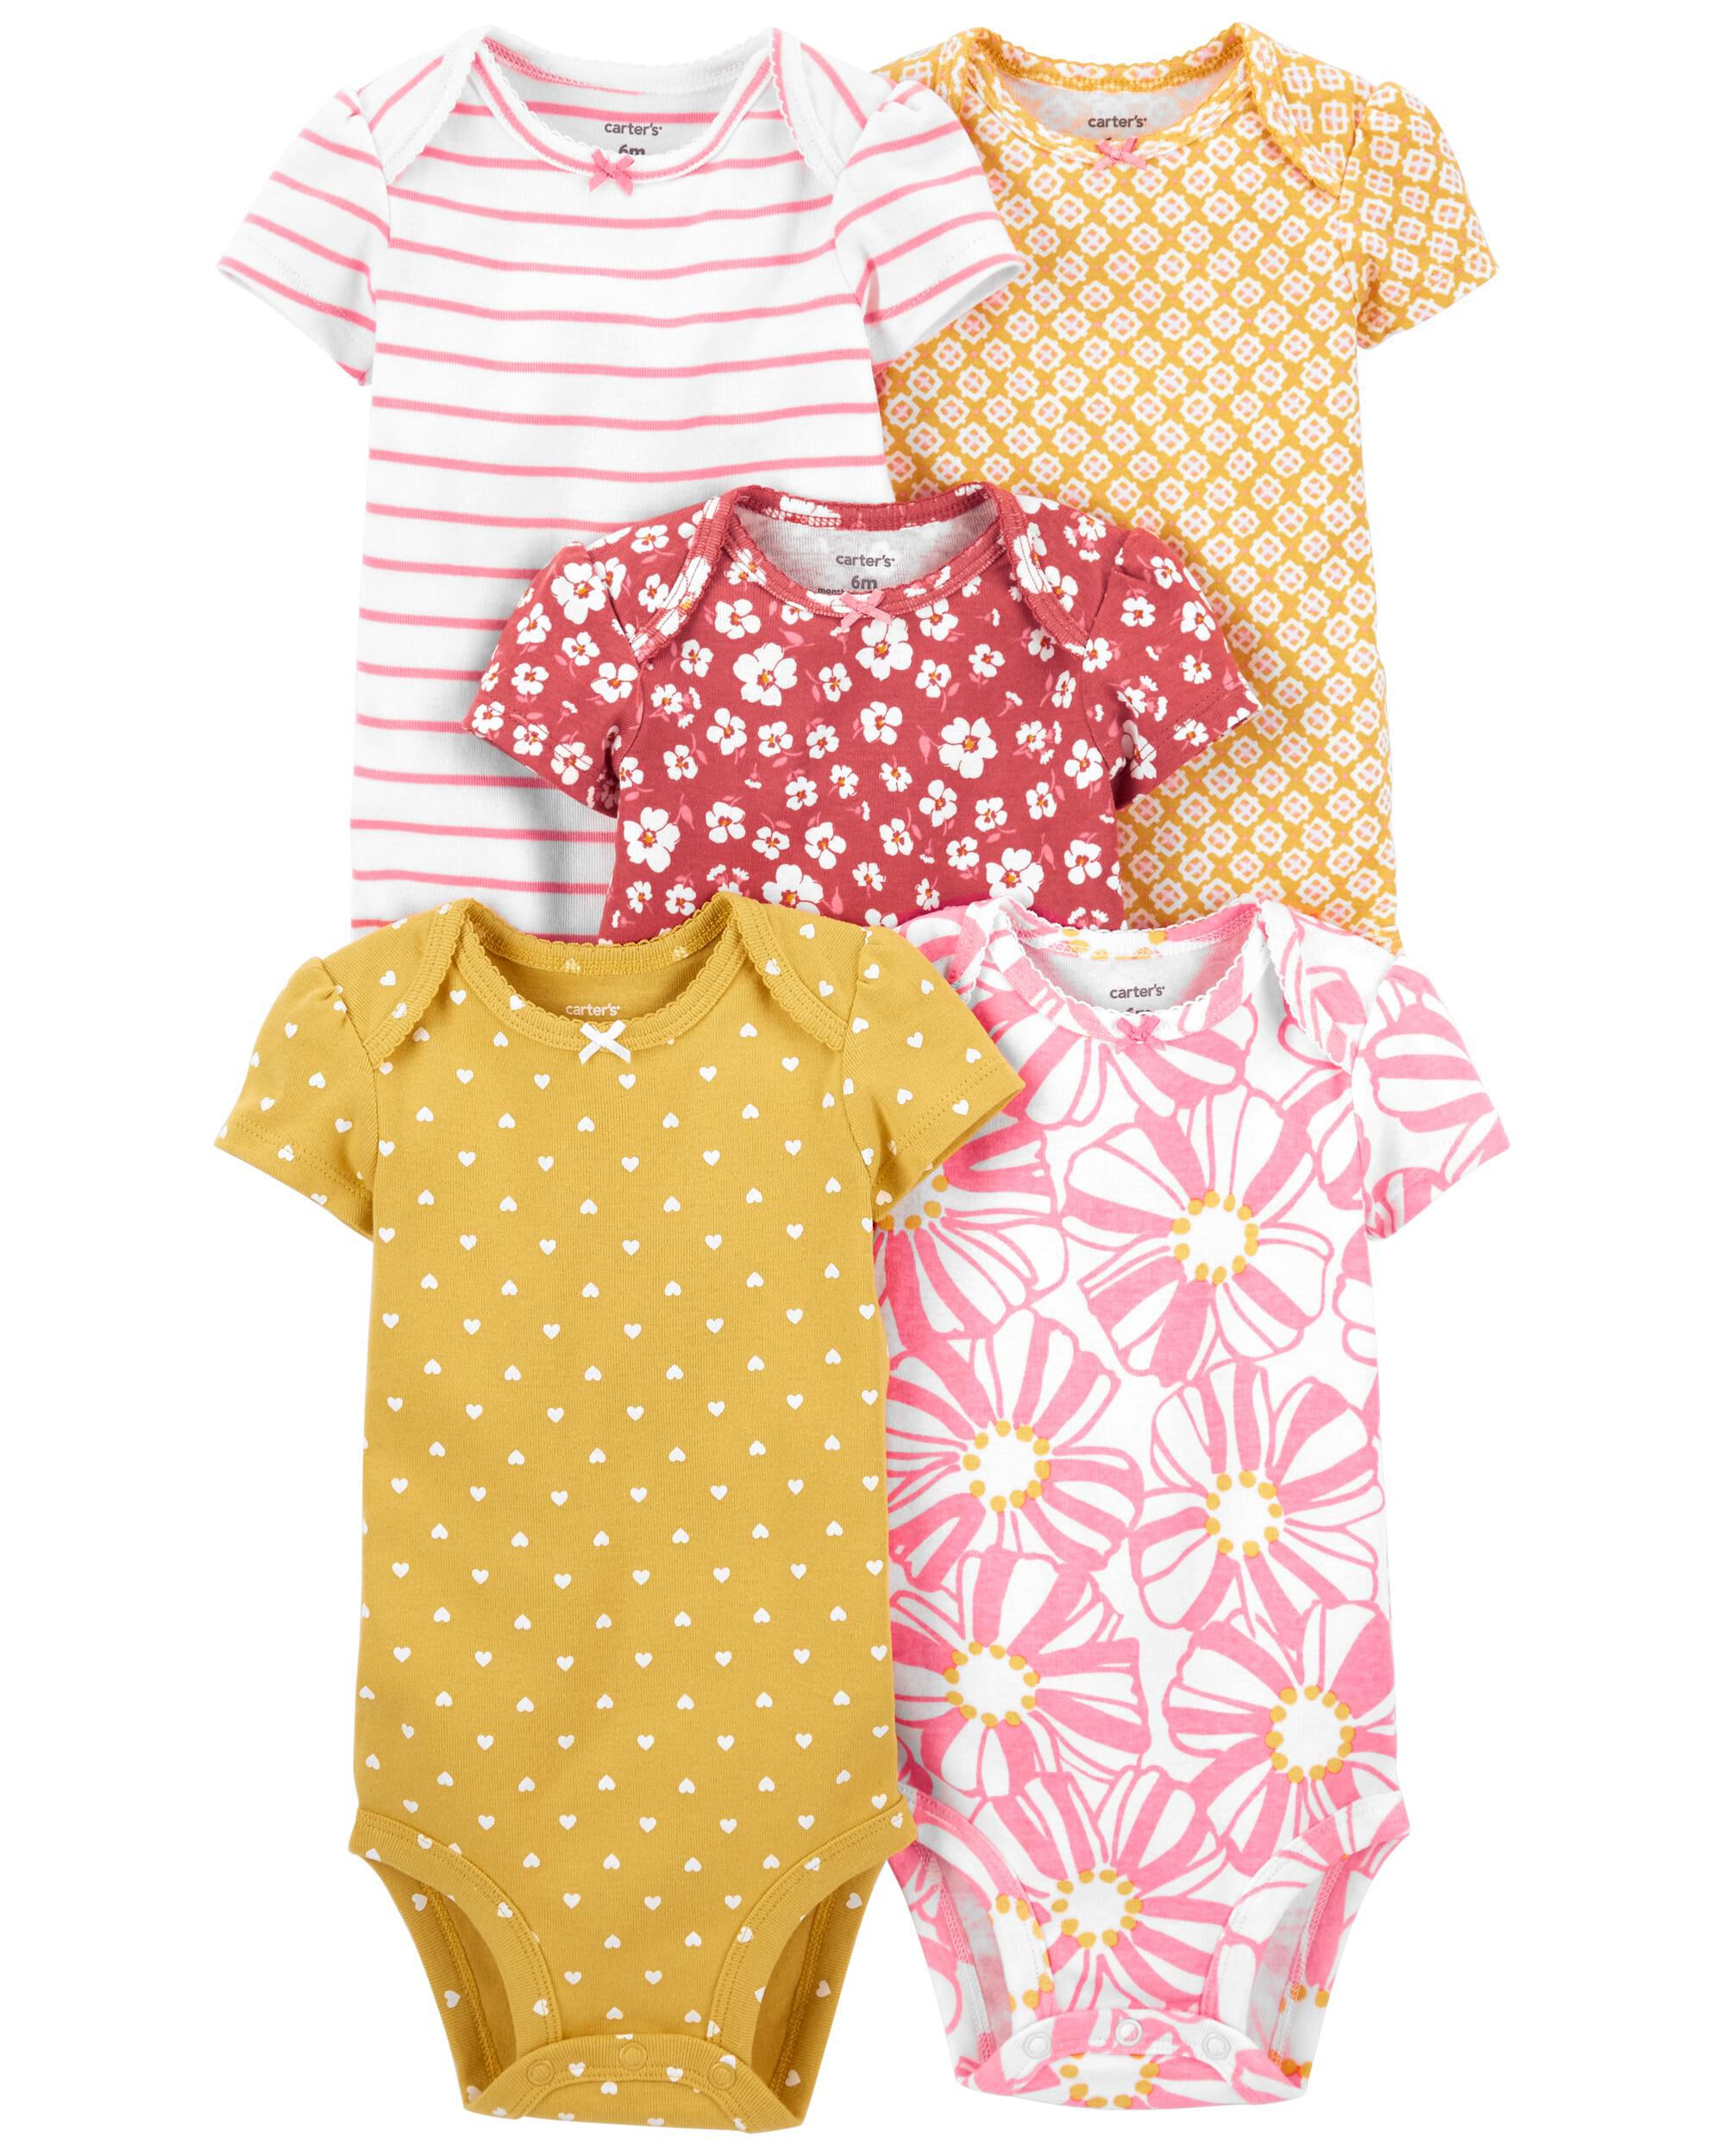 Carters Bodysuits and Pant separates sold as 7 pc set Girls polka floral Size 3M 